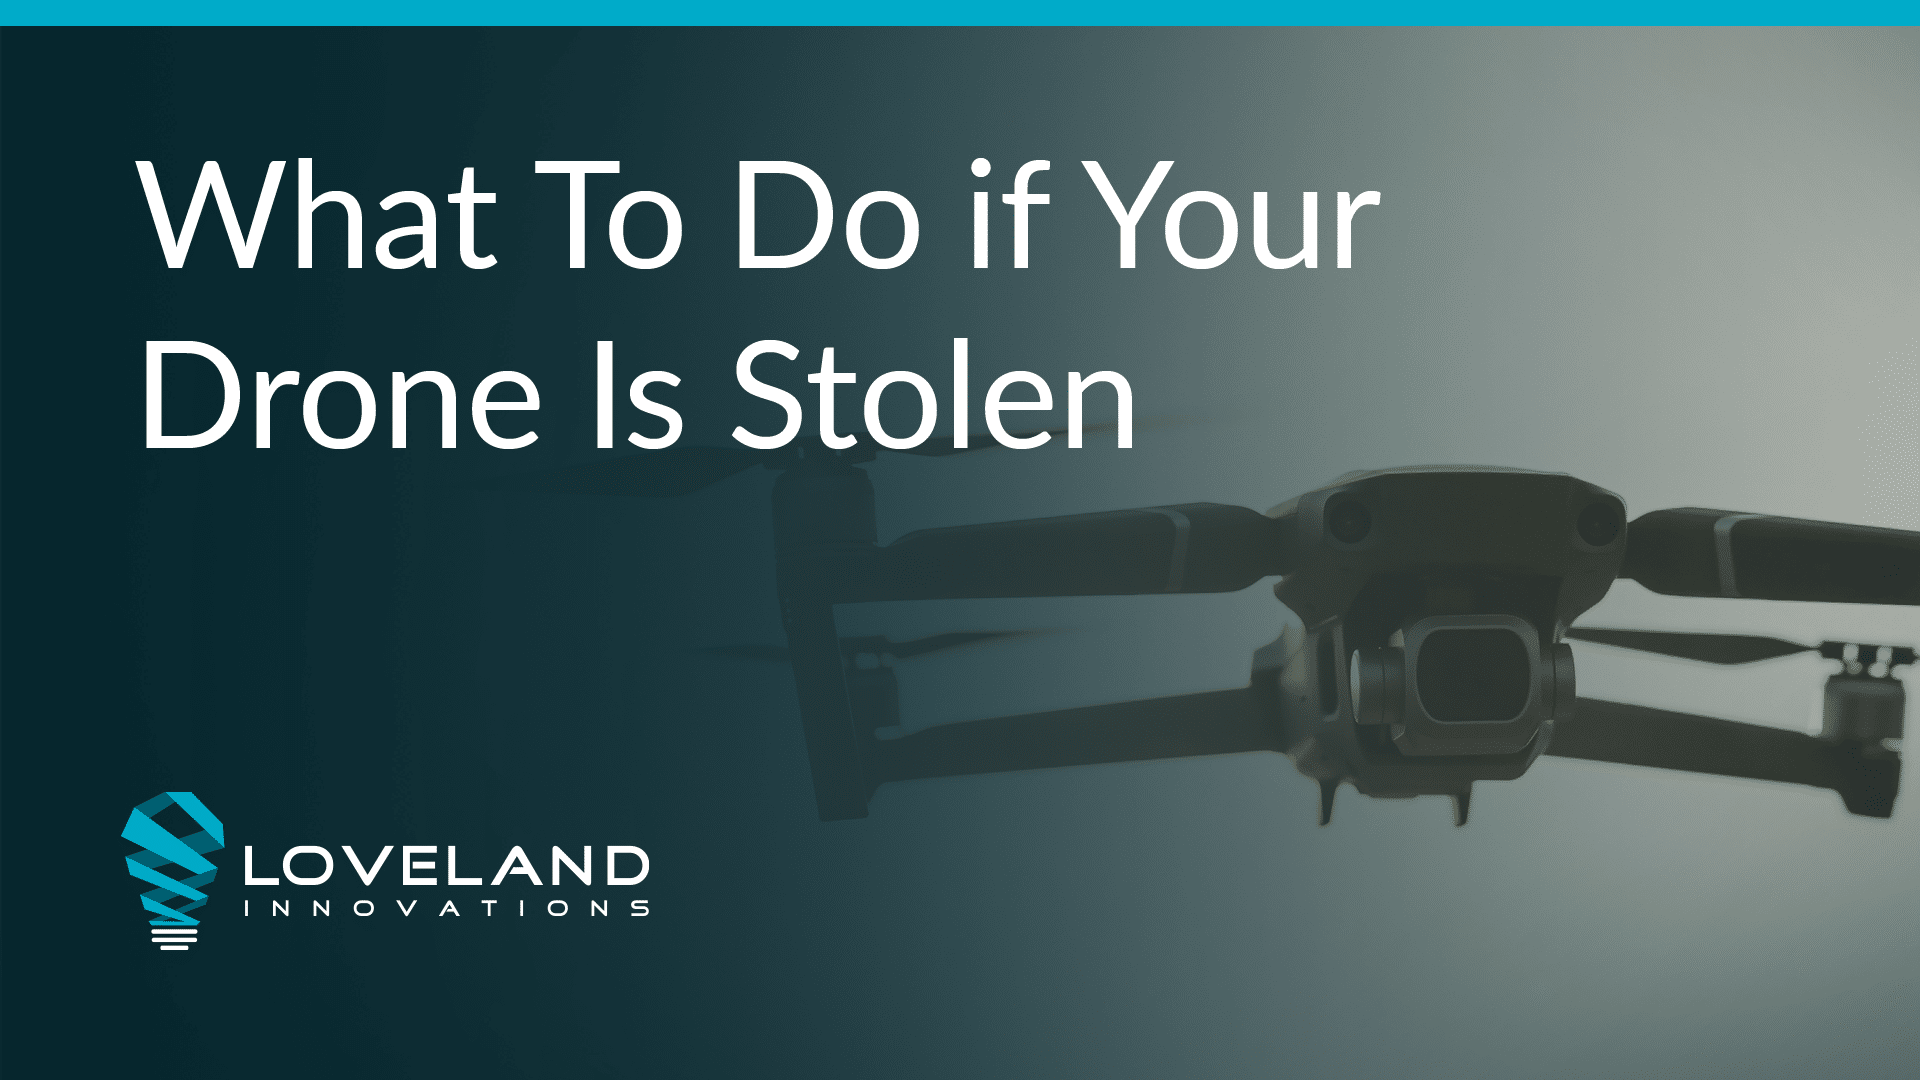 What to do if your drone is stolen.